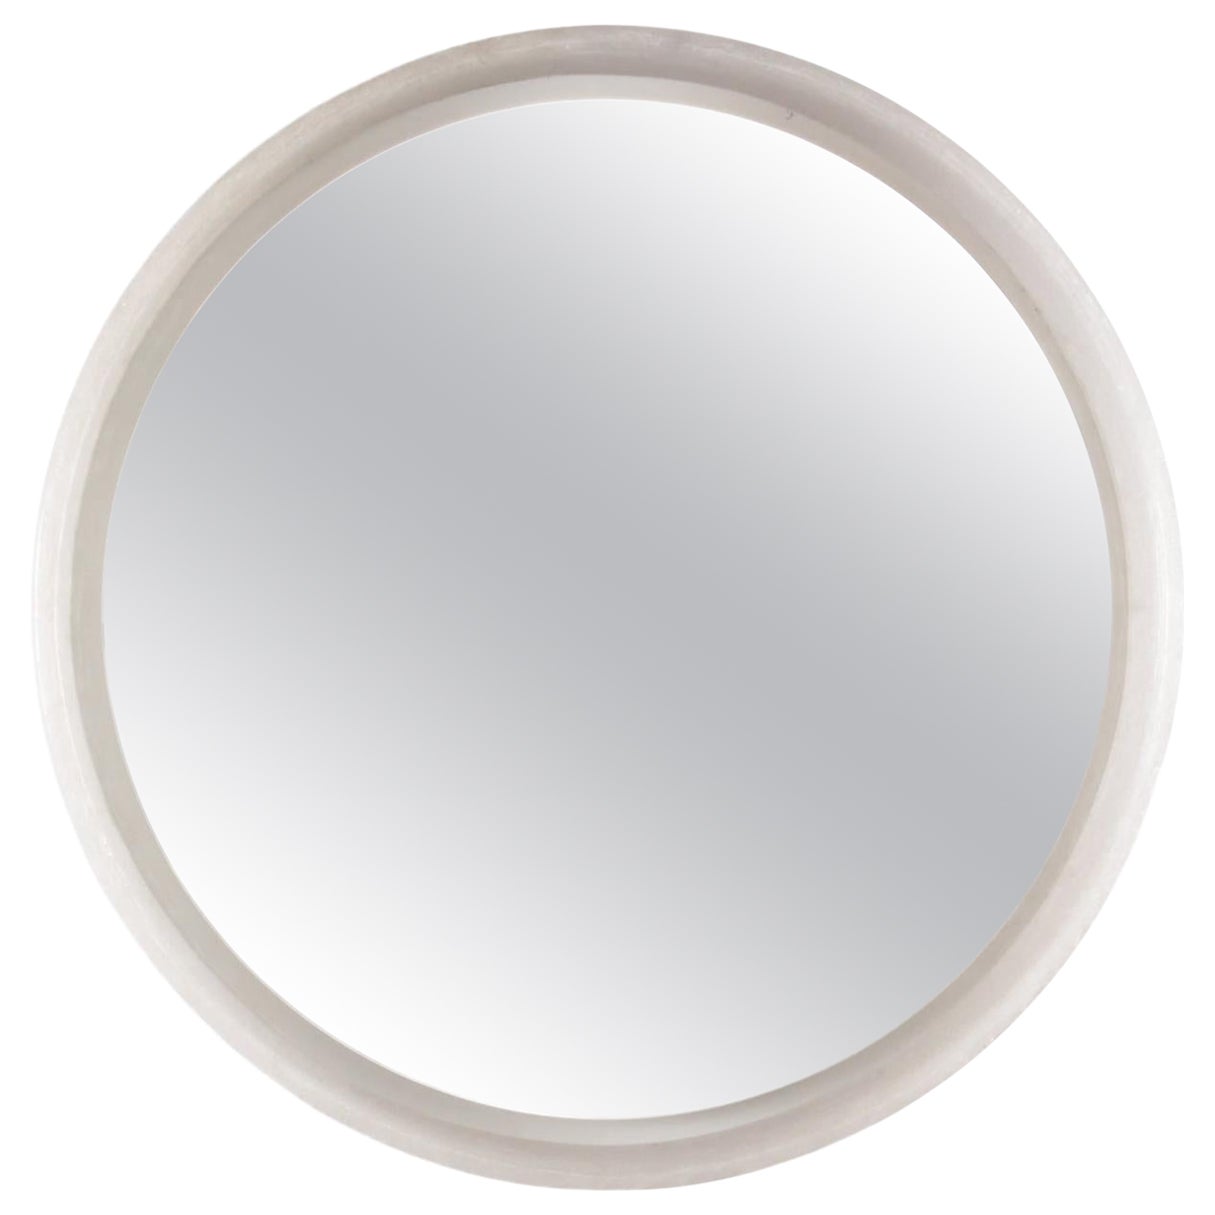 What is the best mirror for bathroom?